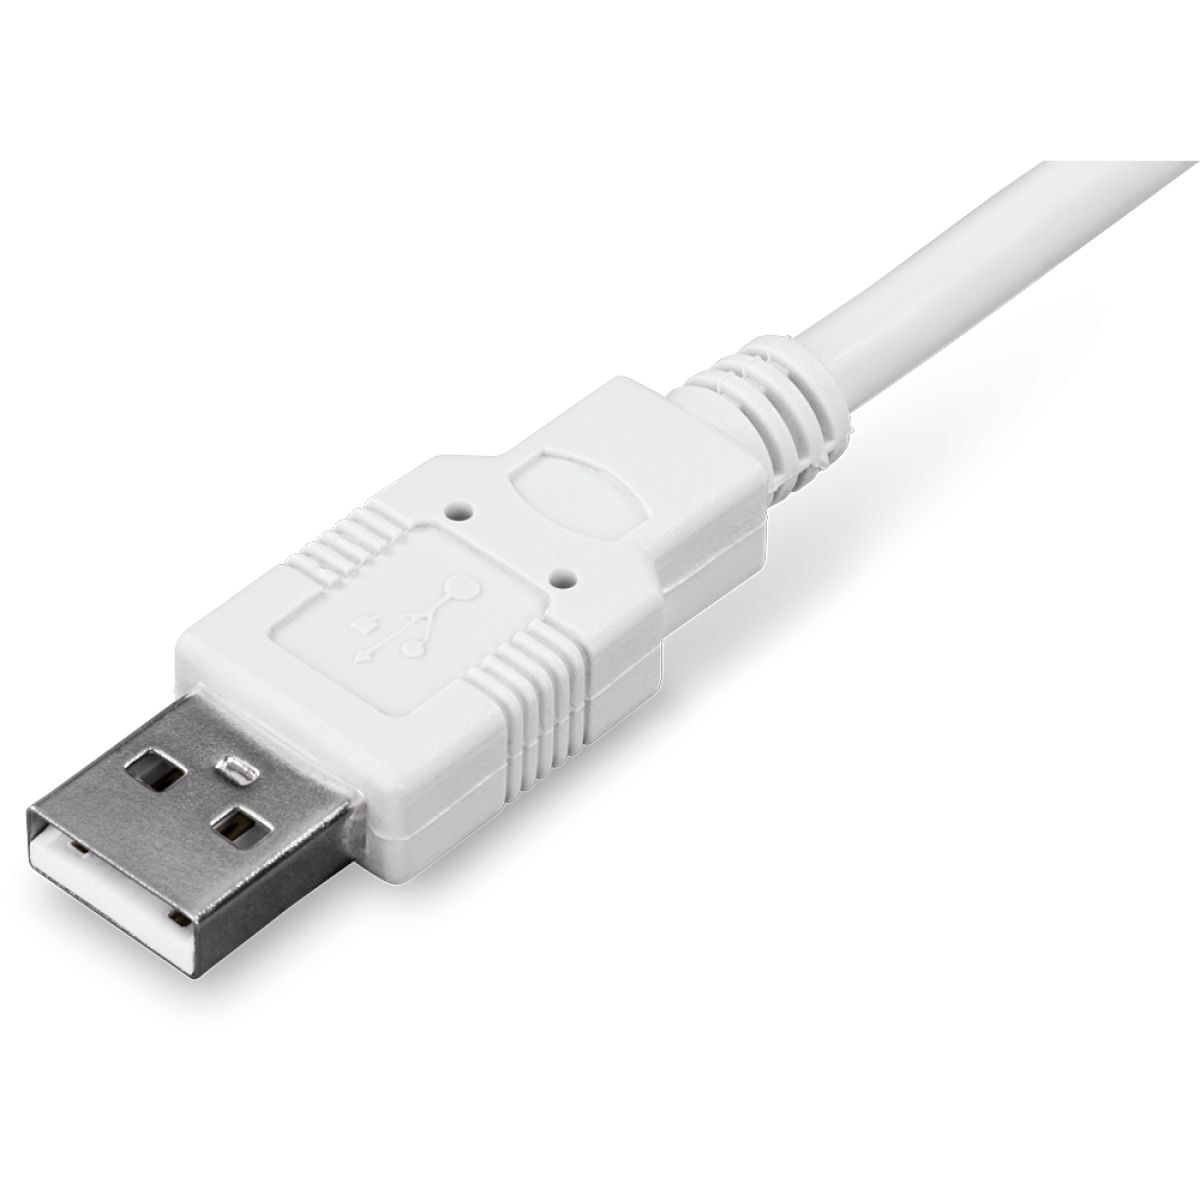 TRENDnet USB to Serial Converter Cable 64cm | TU-S9 | Smart Systems ...